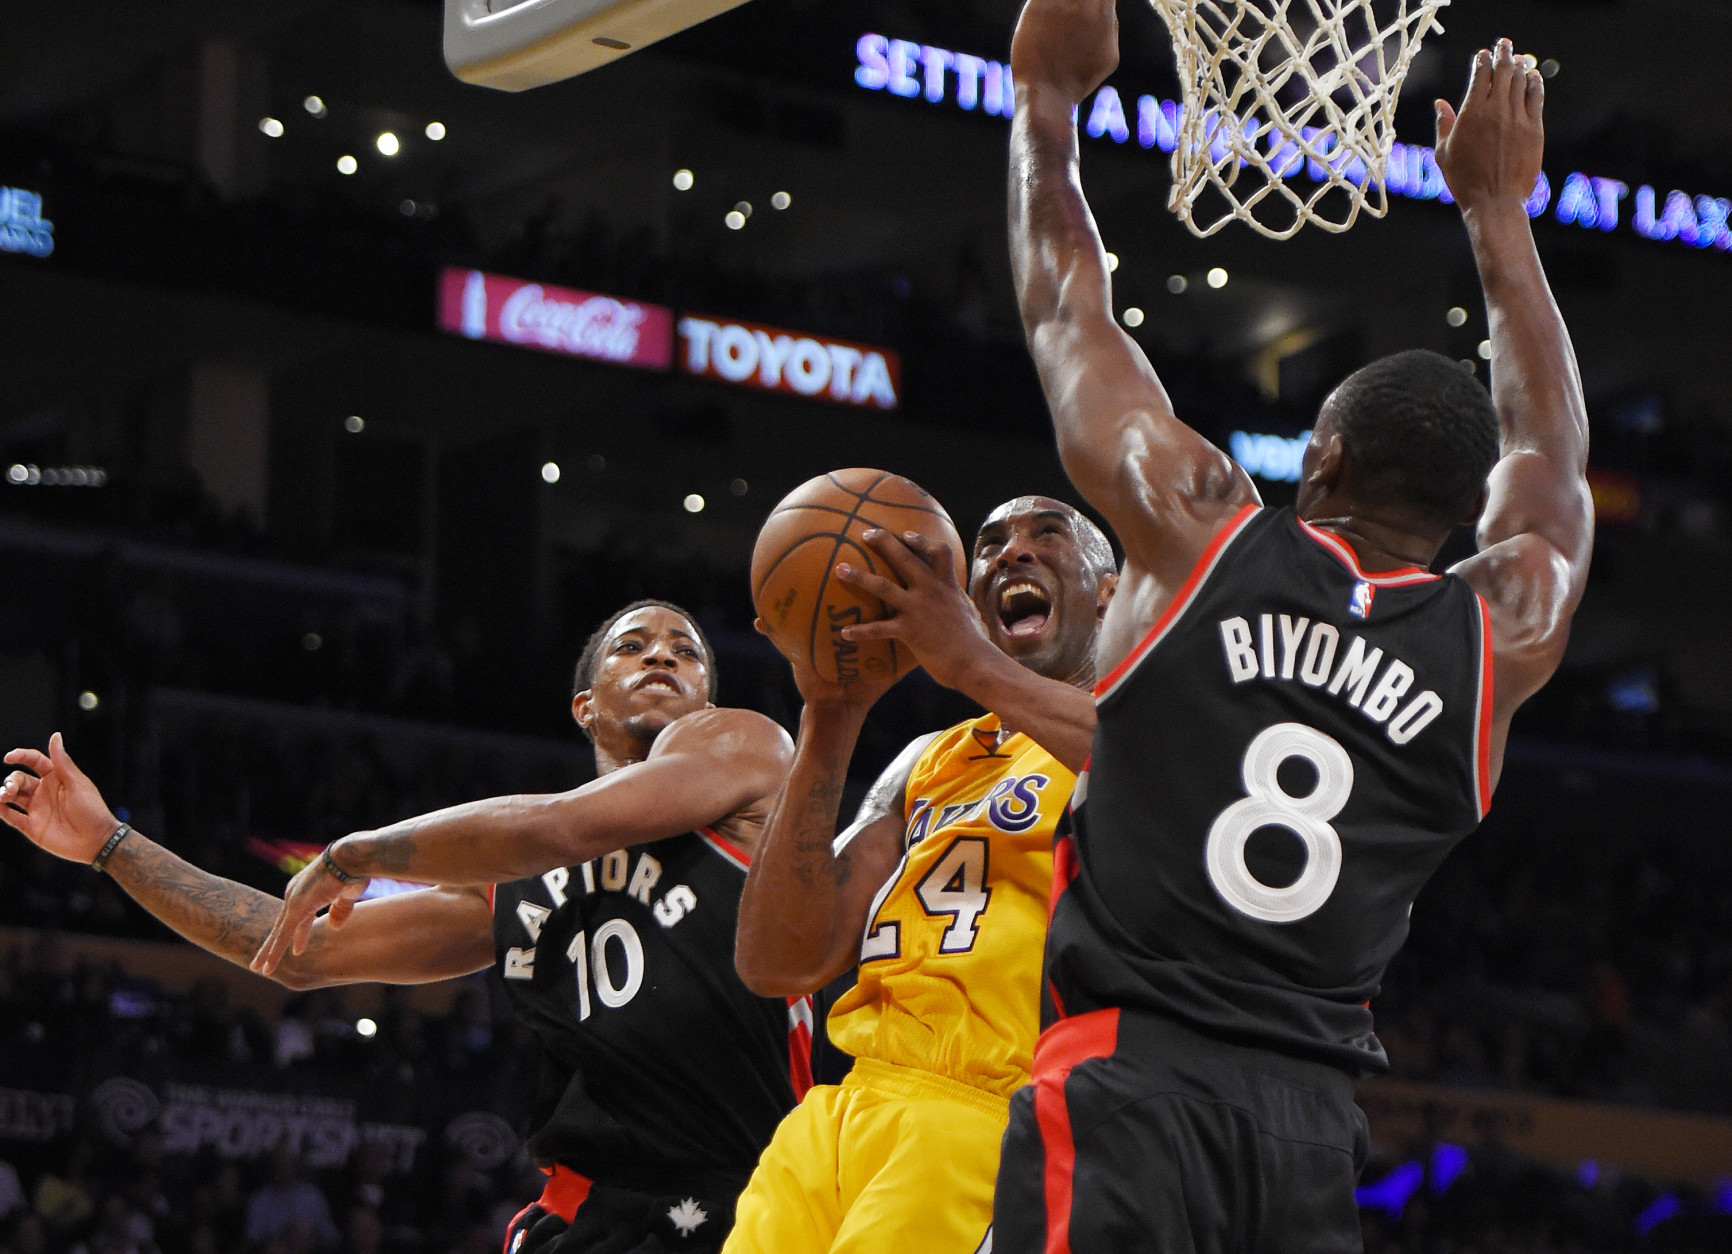 Los Angeles Lakers forward Kobe Bryant, center, shoots as Toronto Raptors guard DeMar DeRozan, left, and forward Bismack Biyombo, of Congo, defend during the second half of an NBA basketball game, Friday, Nov. 20, 2015, in Los Angeles. The Raptors won 102-91. (AP Photo/Mark J. Terrill)